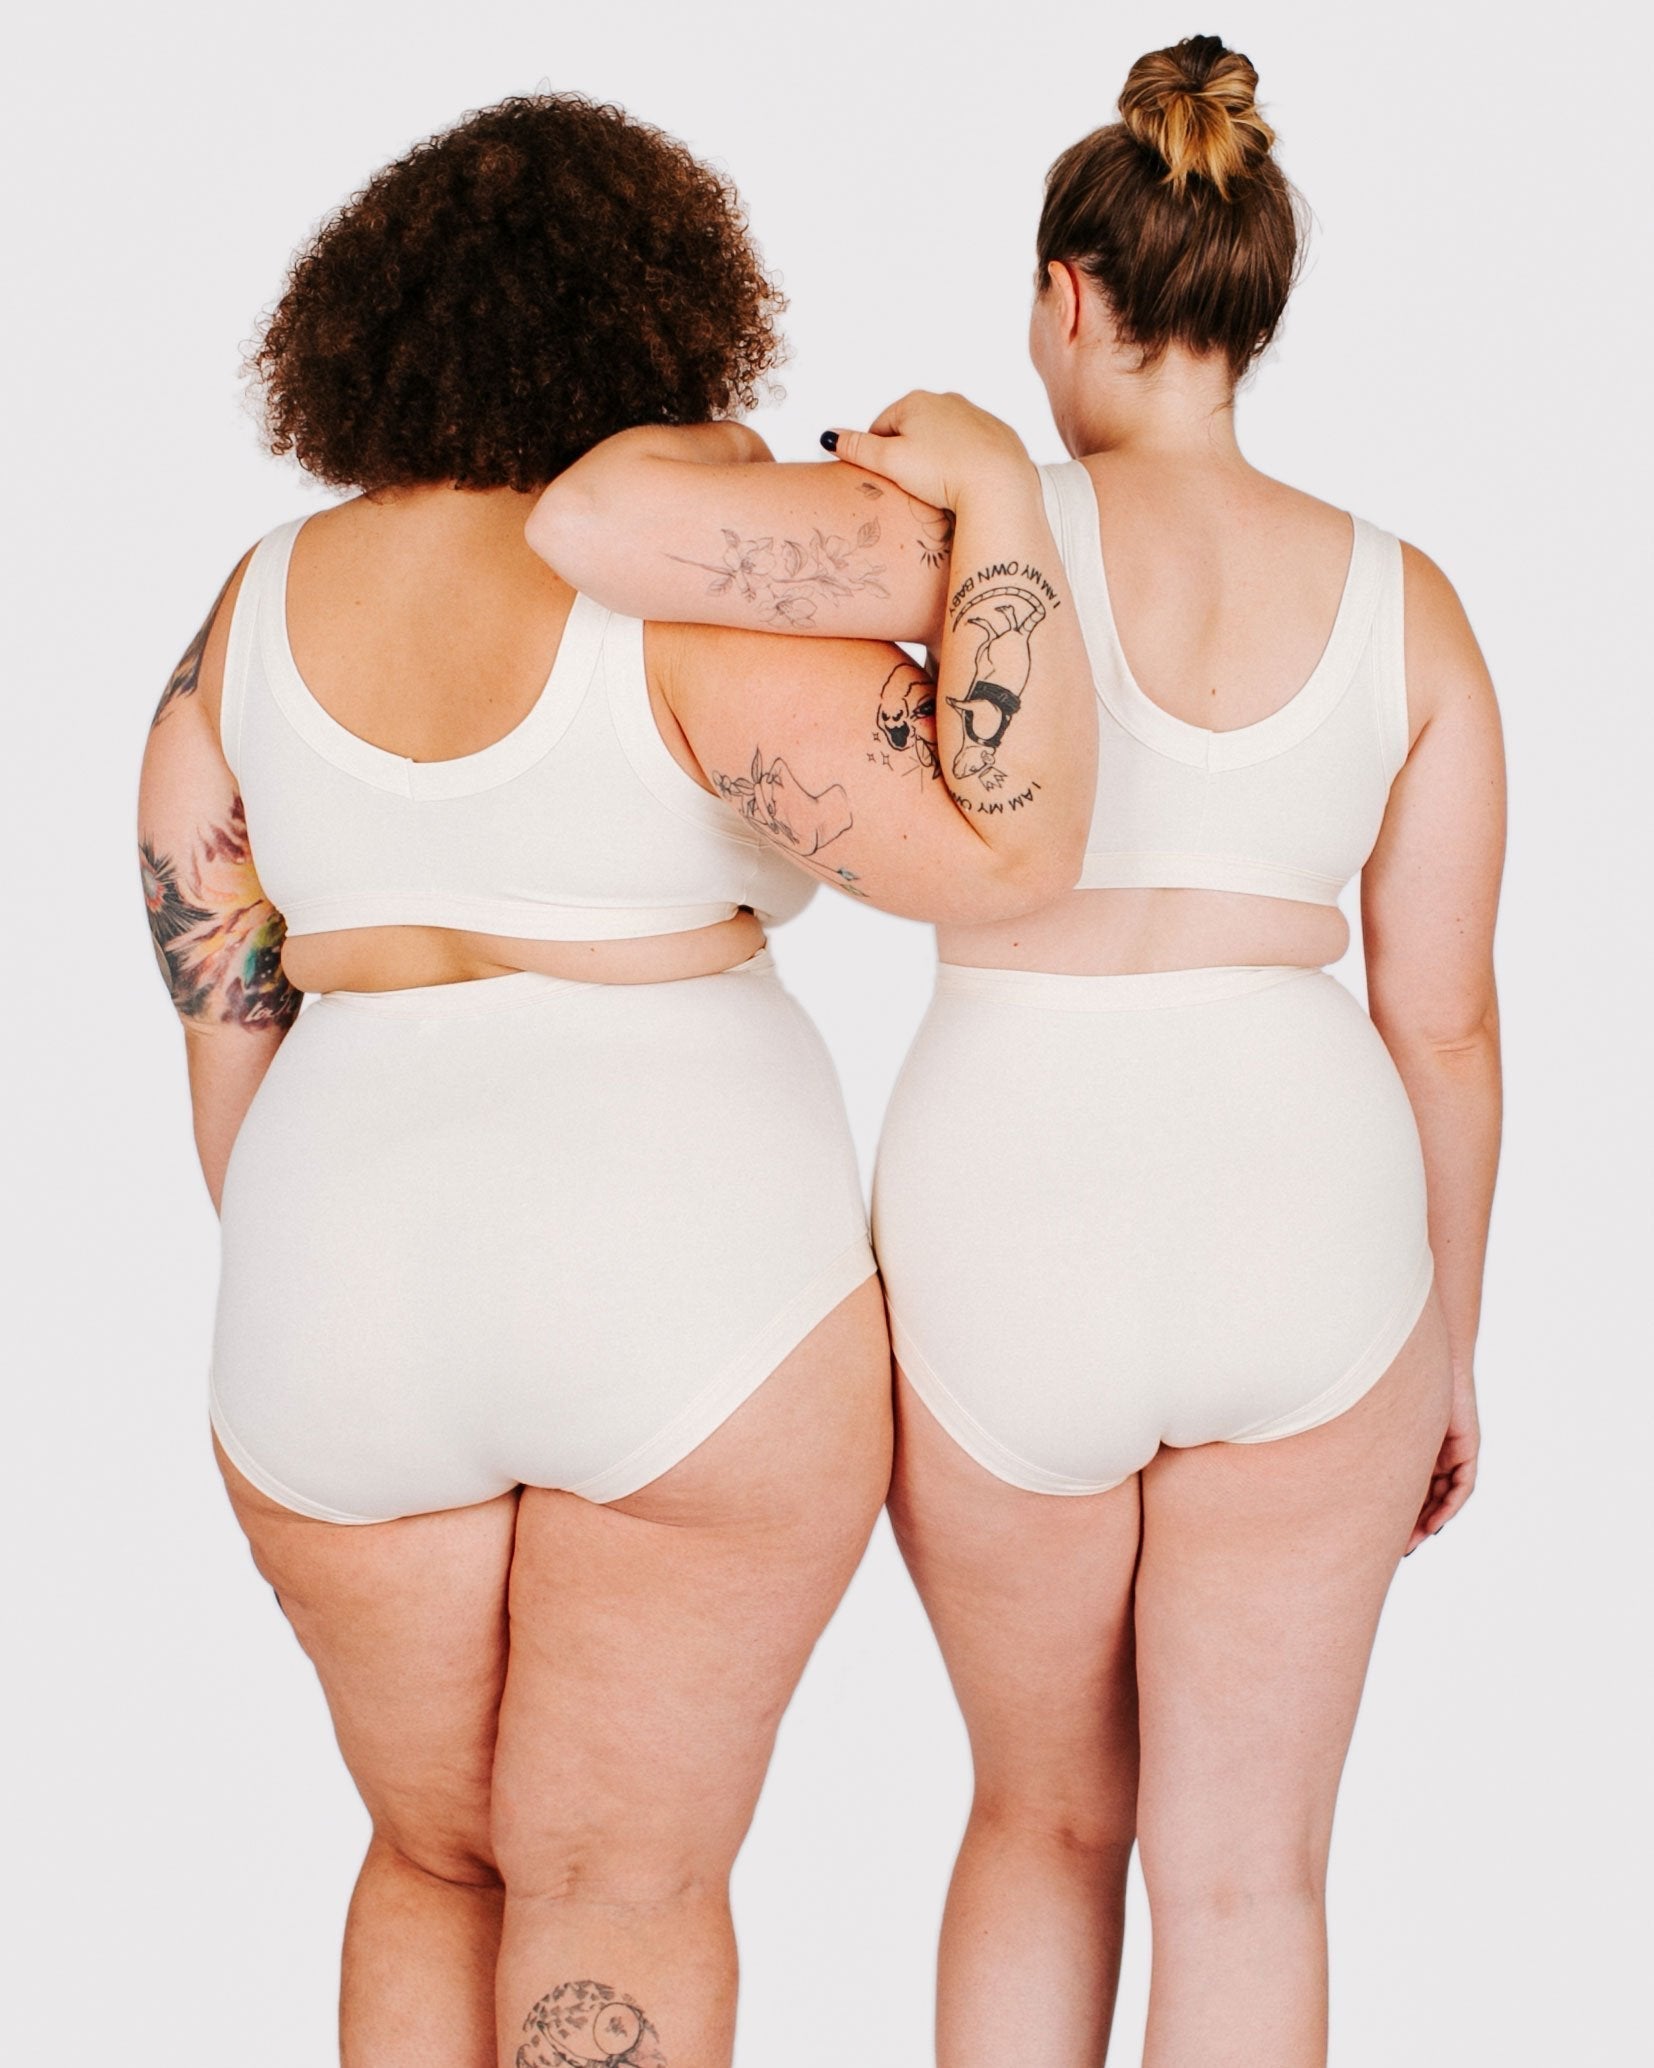 Fit photo from the back of Thunderpants organic cotton Sky Rise style underwear and Bralette in off-white on two model standing together.